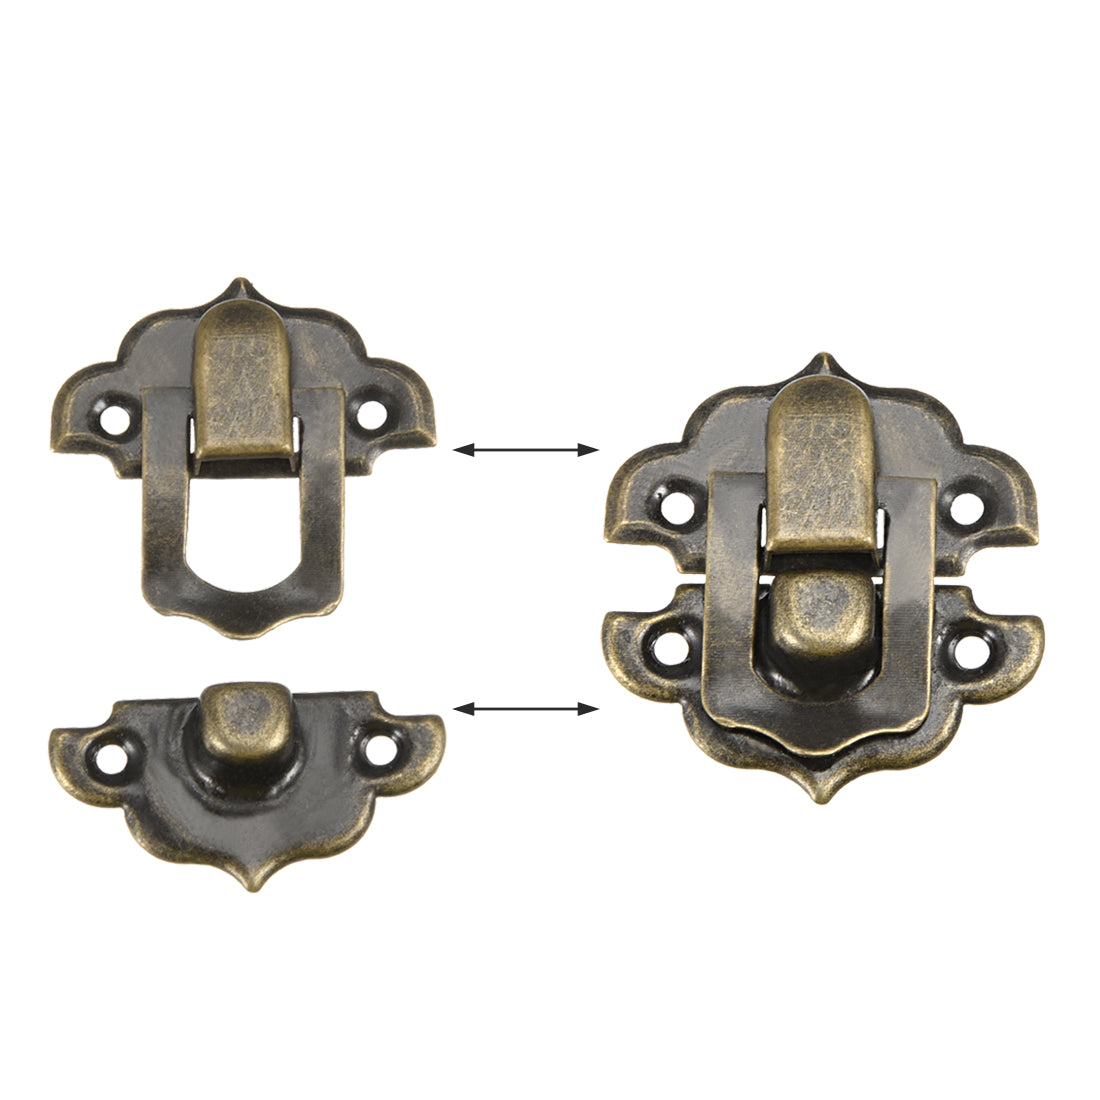 uxcell Uxcell Box Latch, Small Size Bronze Decorative Hasp Jewelry cases Catch w Screws 10 Sets